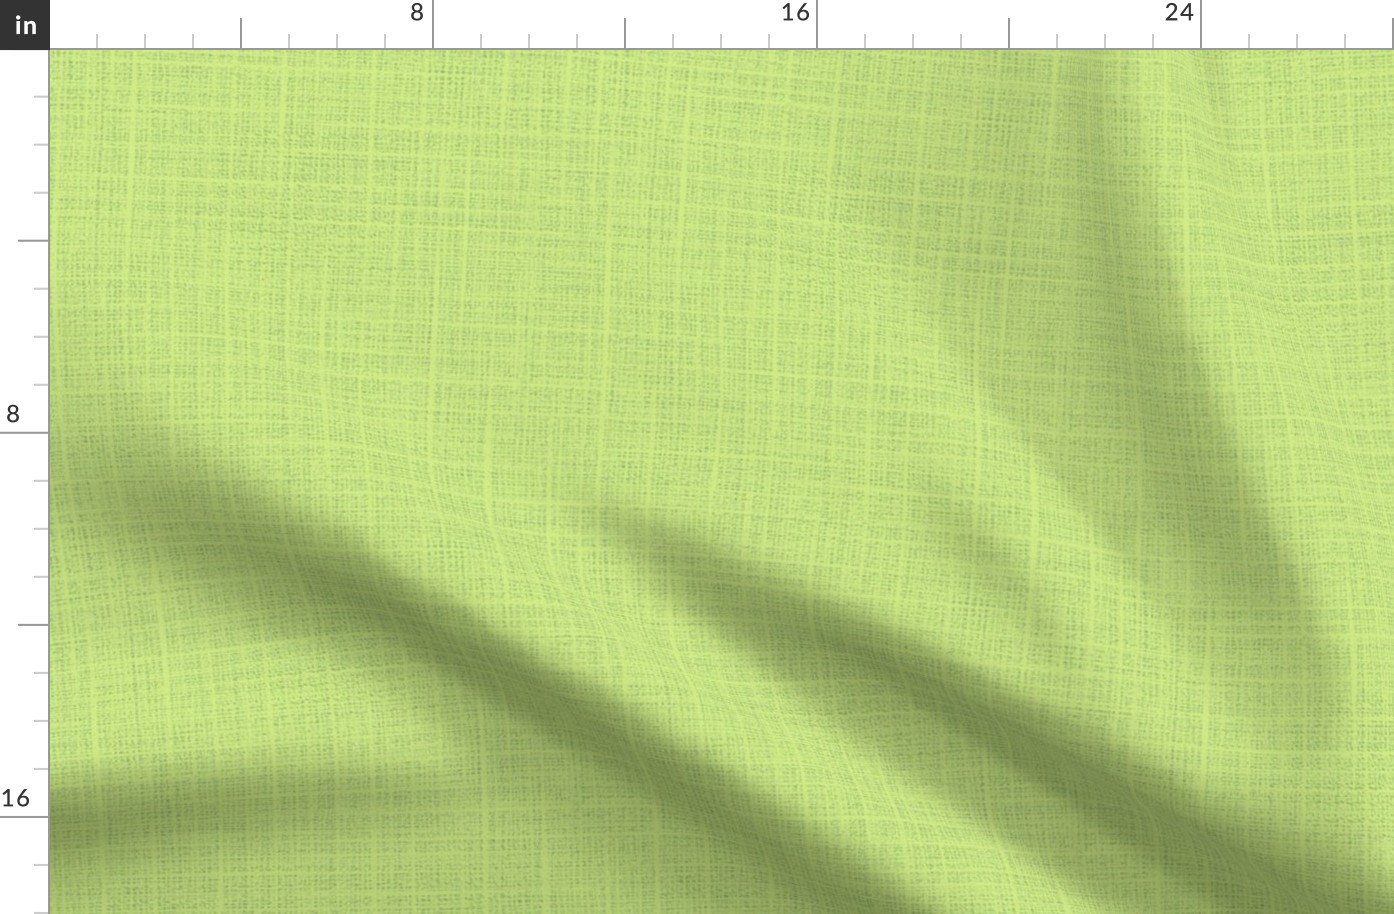 textured coordinate for my "explore the space" design in lime green